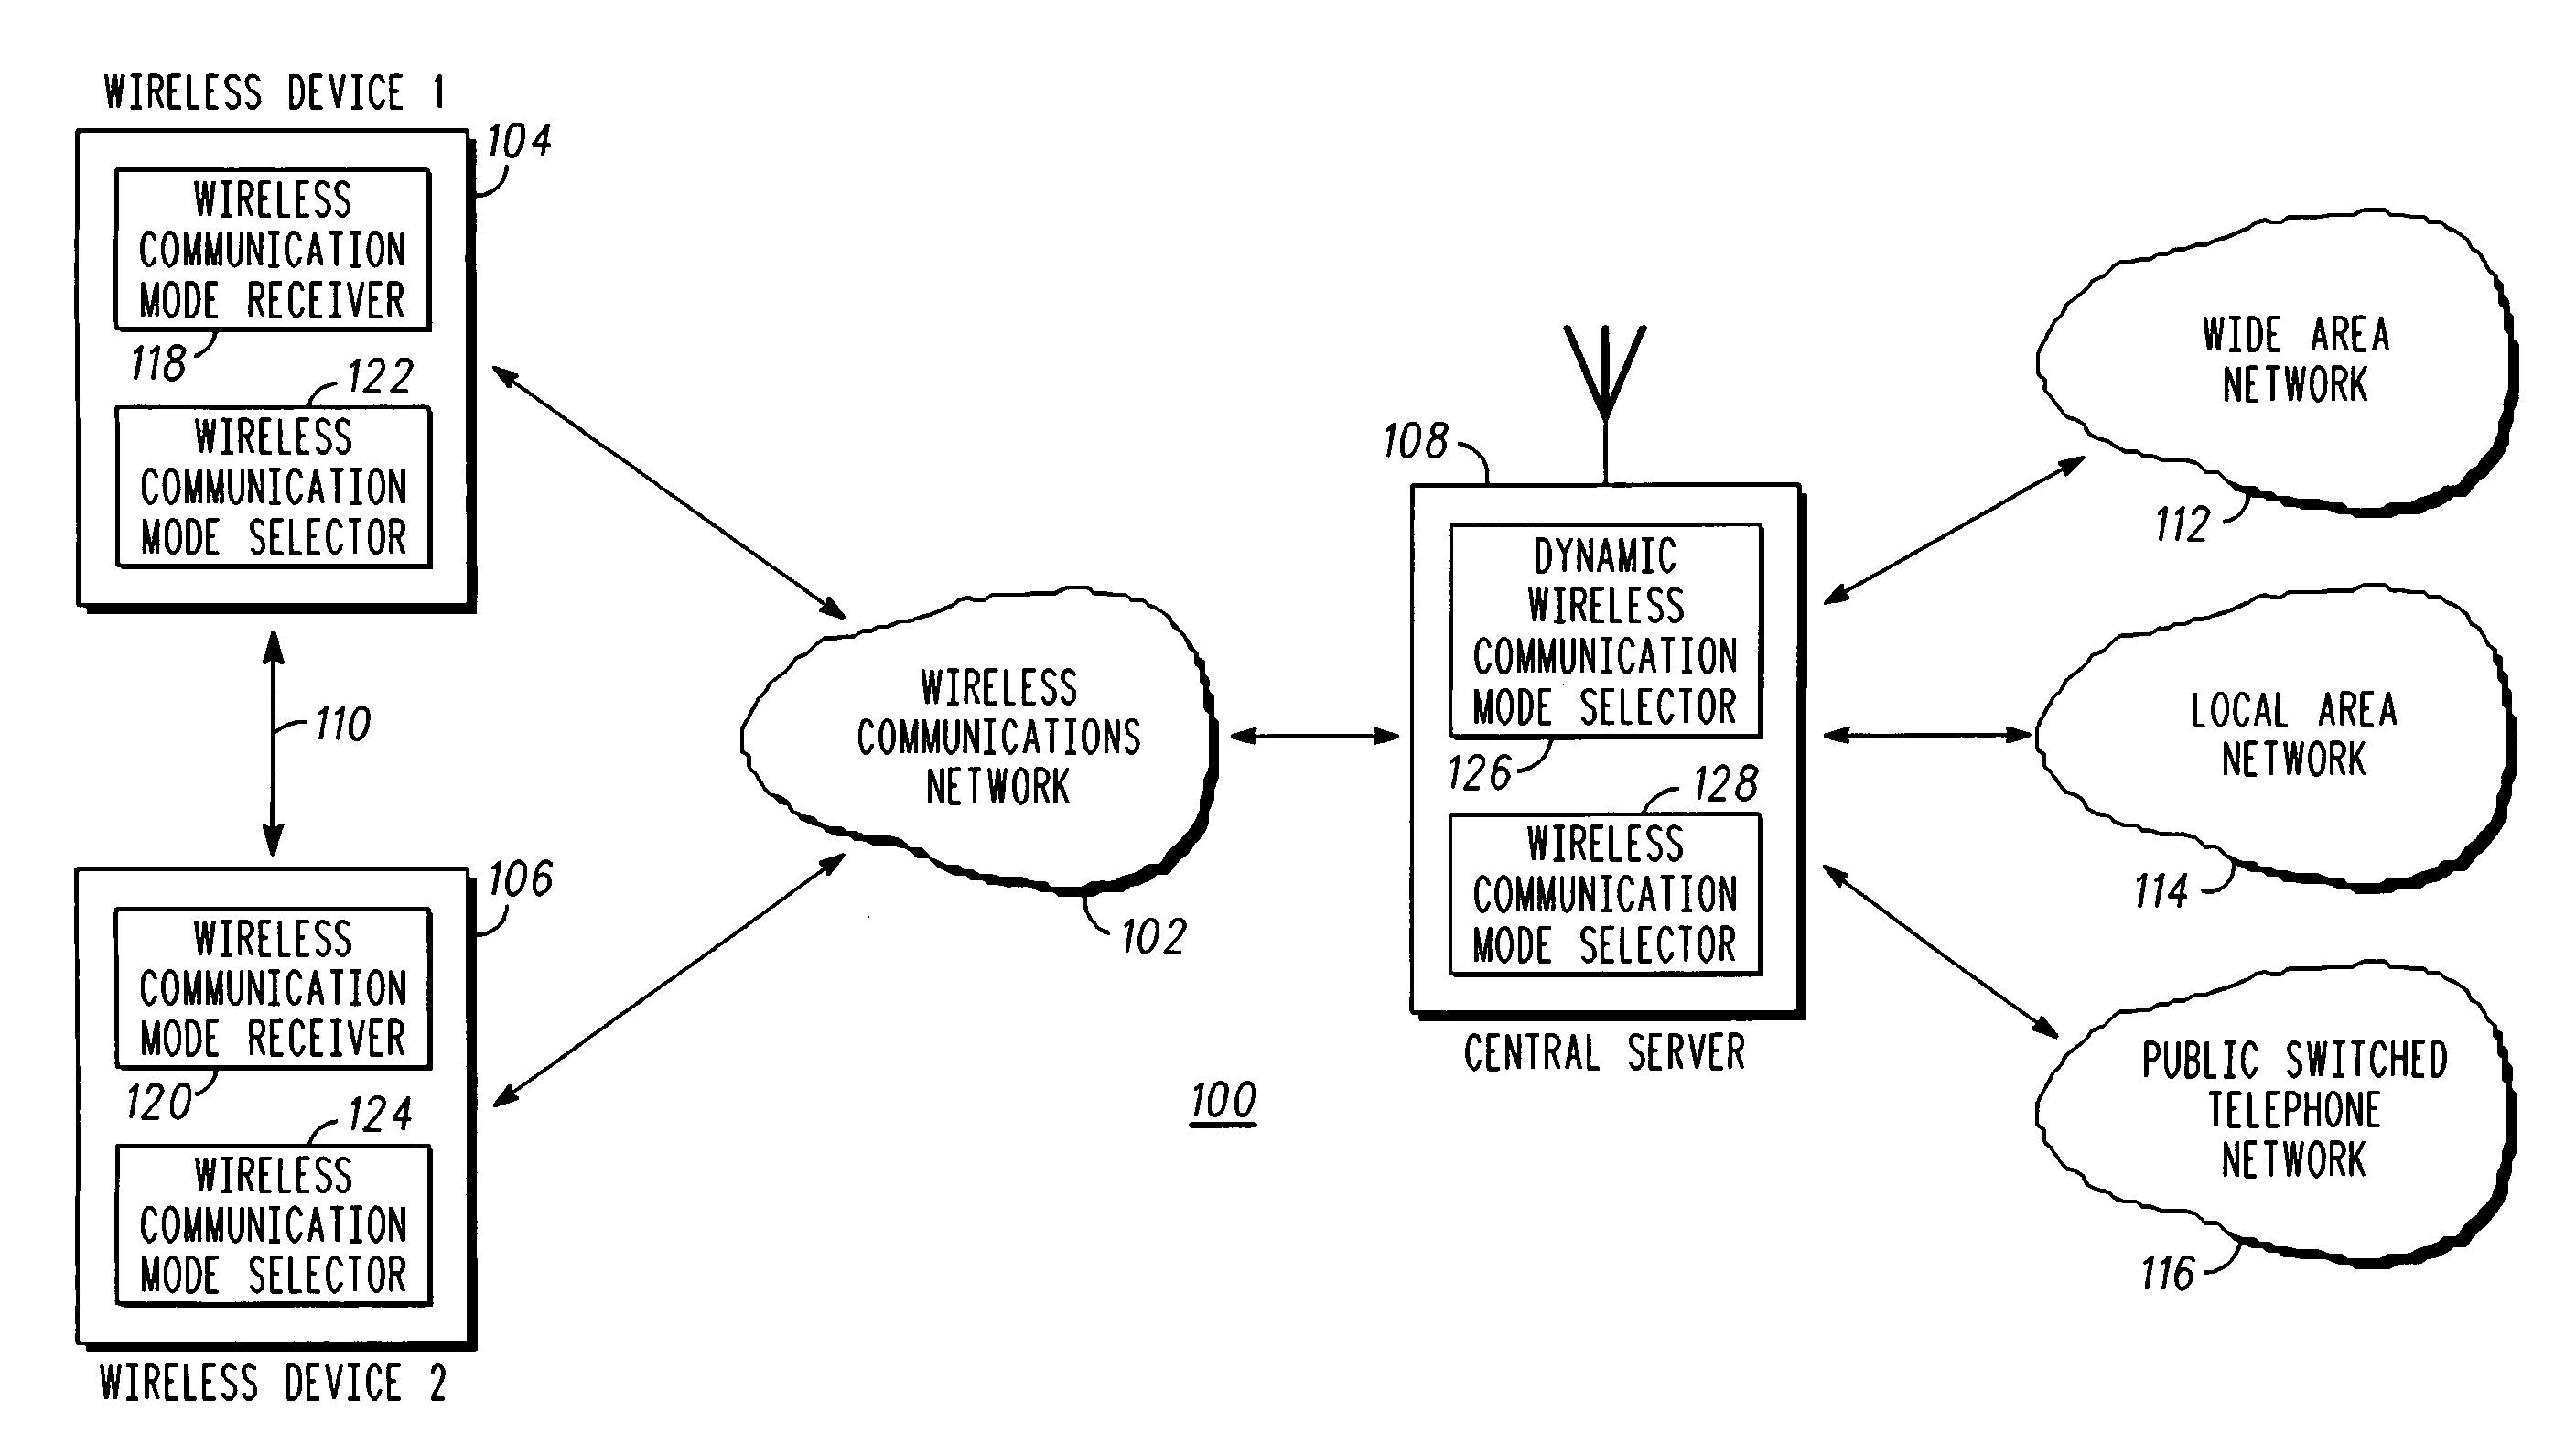 System and method for dynamically selecting wireless information communication modes for a wireless communication device